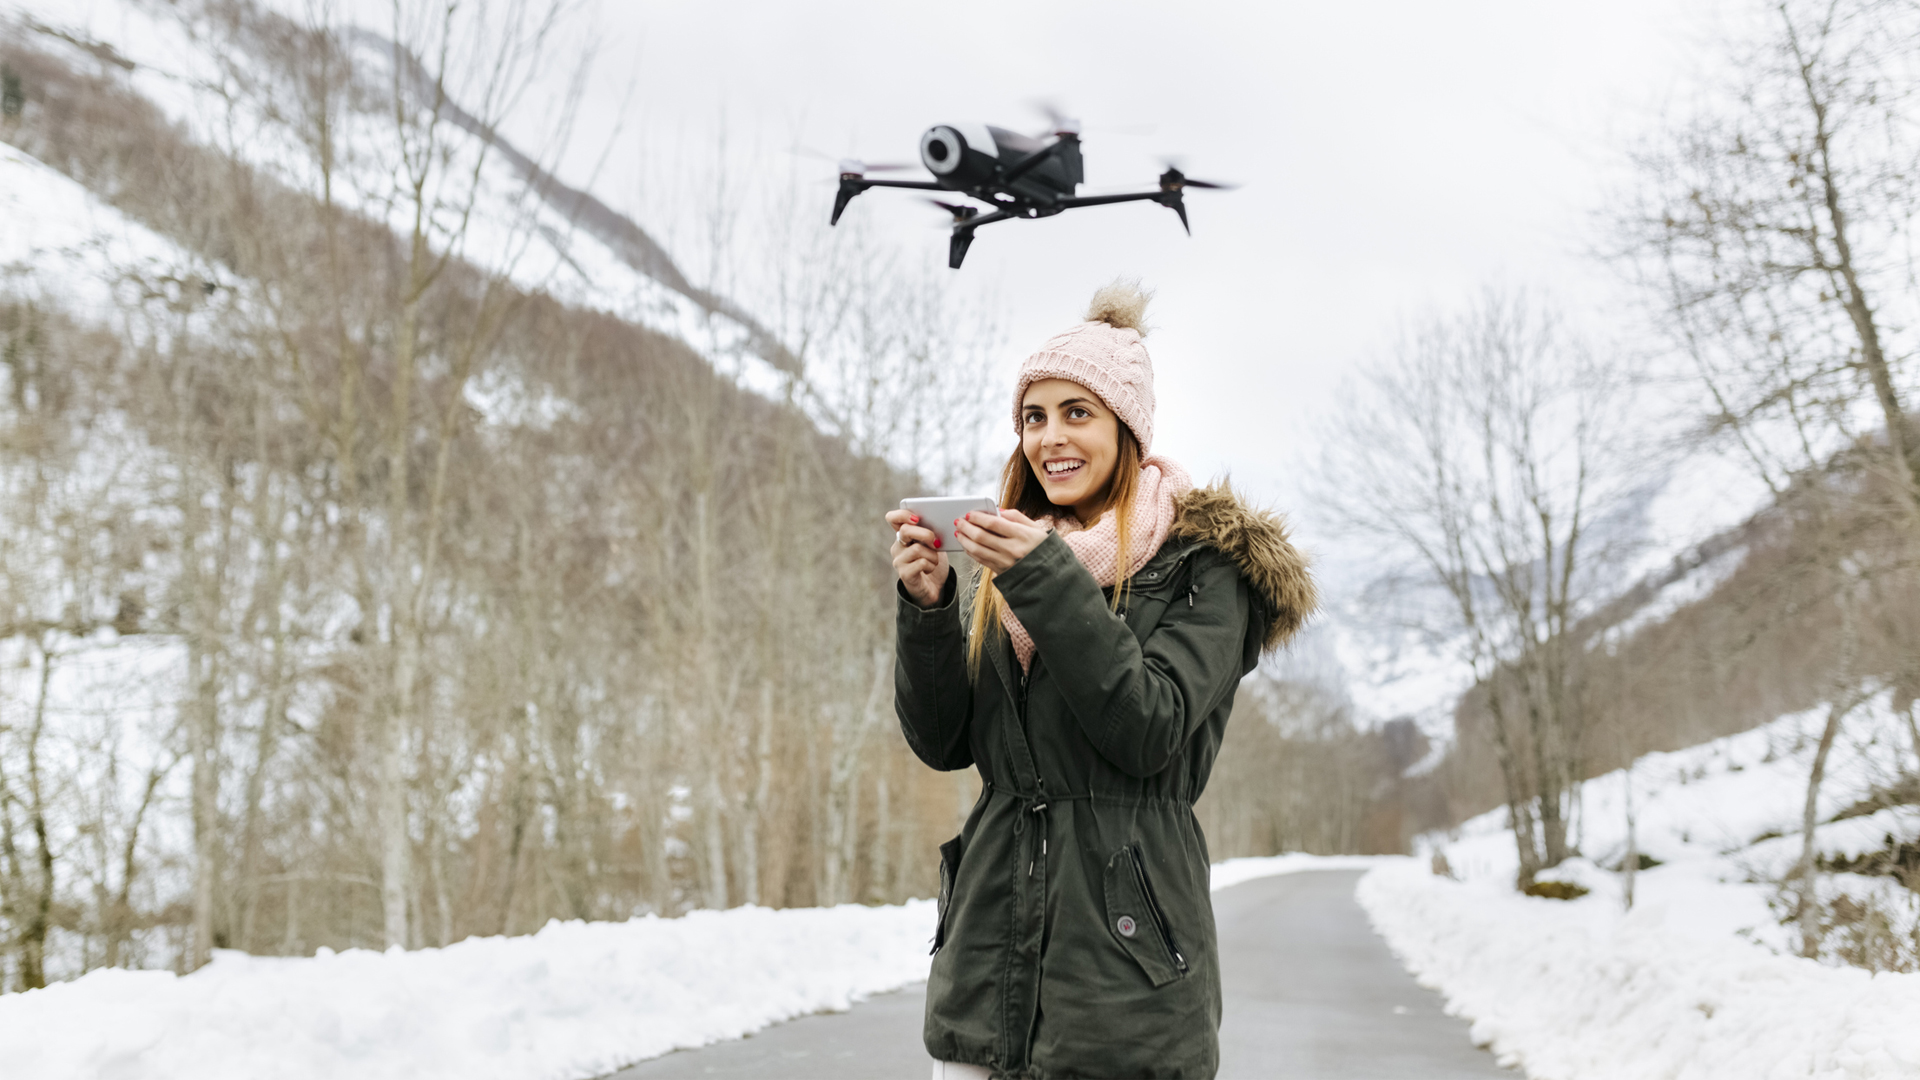 Drone Regulations: Everything You Need to Know: The image shows a woman flying a drone in the winter